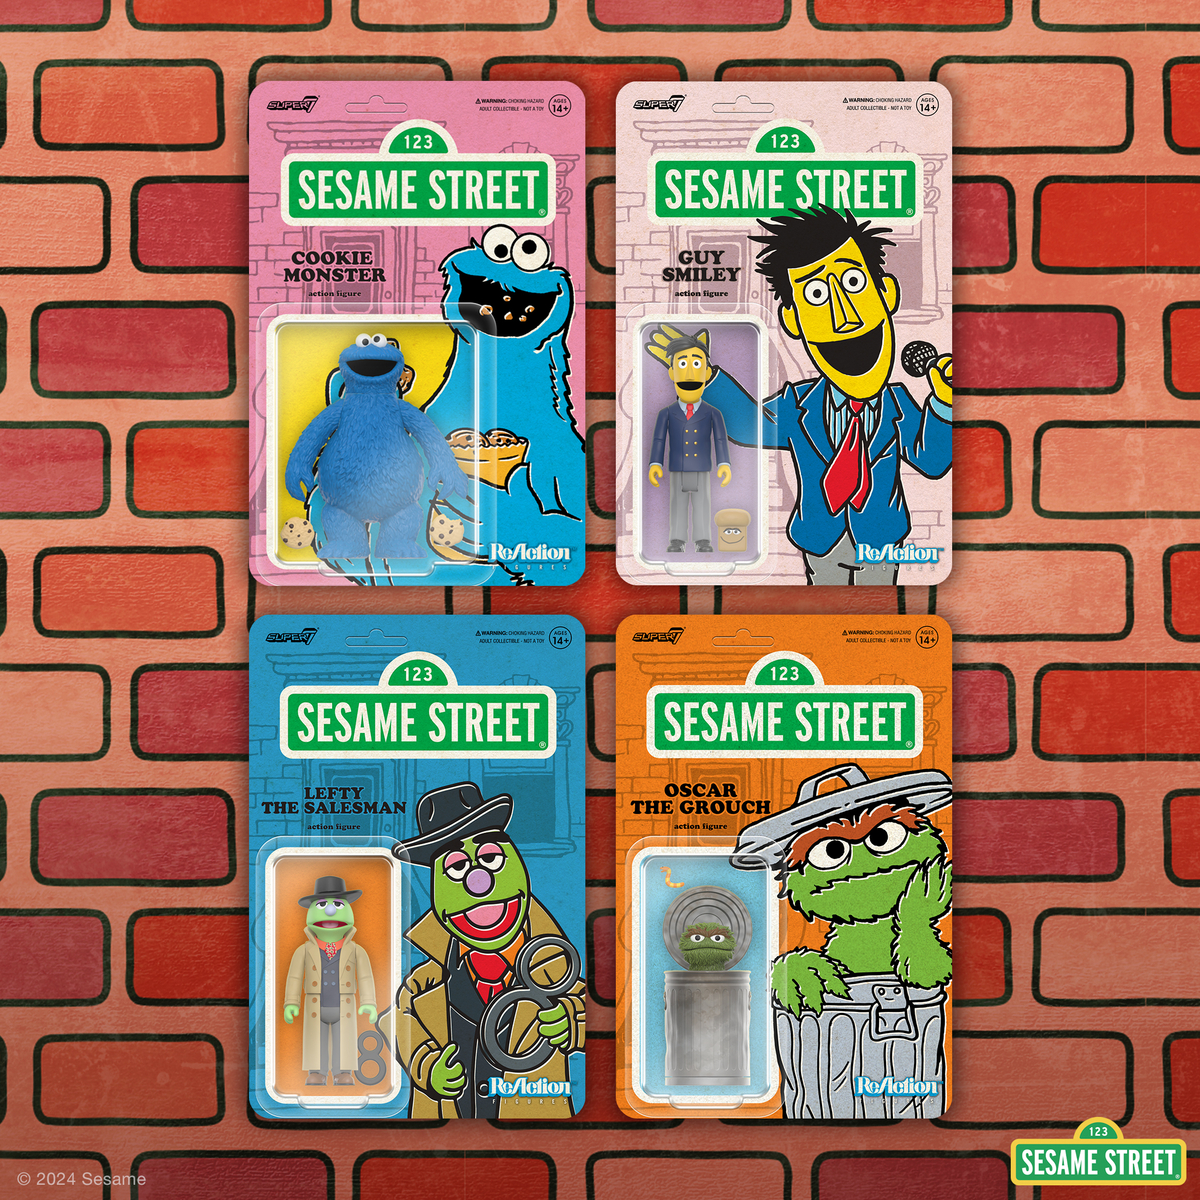 We're giving away a complete set of Sesame Street ReAction Figures Wave 2, including Cookie Monster, Oscar The Grouch, Lefty The Salesman, and Guy Smiley! How to Enter: 1. Follow @Super7store 2. RT AND Like this post #Giveawy #Super7giveaway #SesameStreet